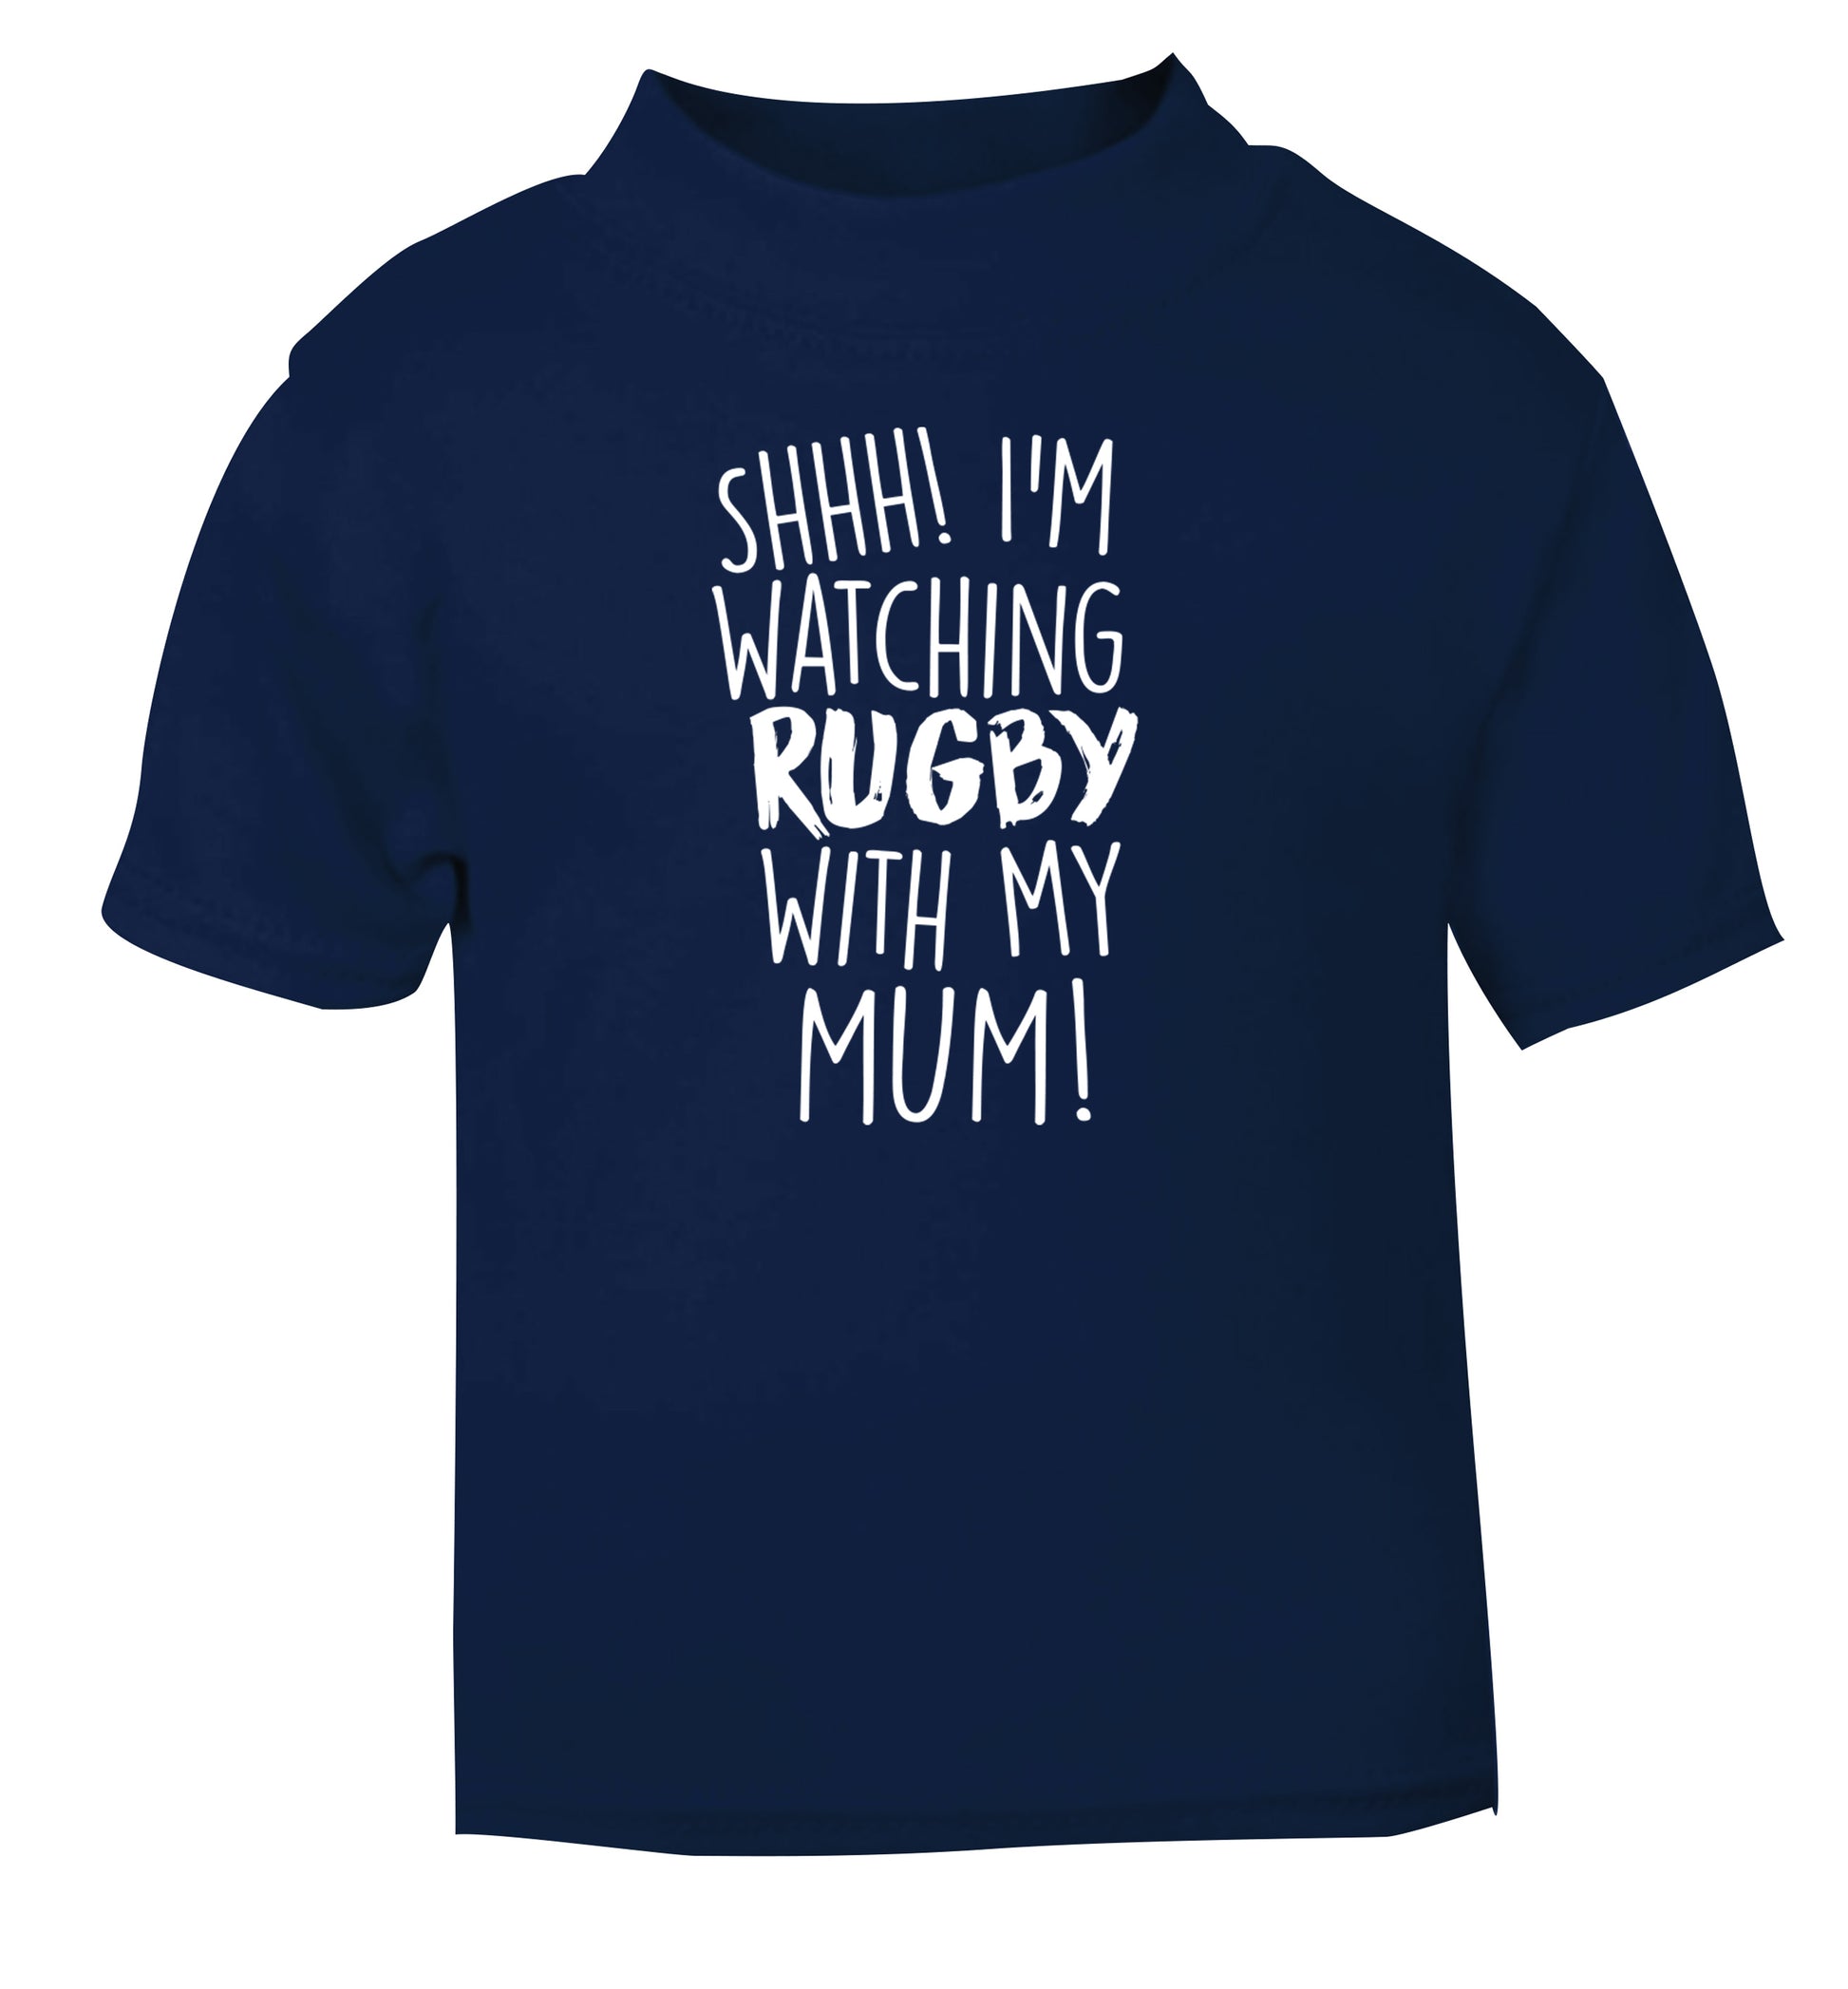 Shh... I'm watching rugby with my mum navy Baby Toddler Tshirt 2 Years